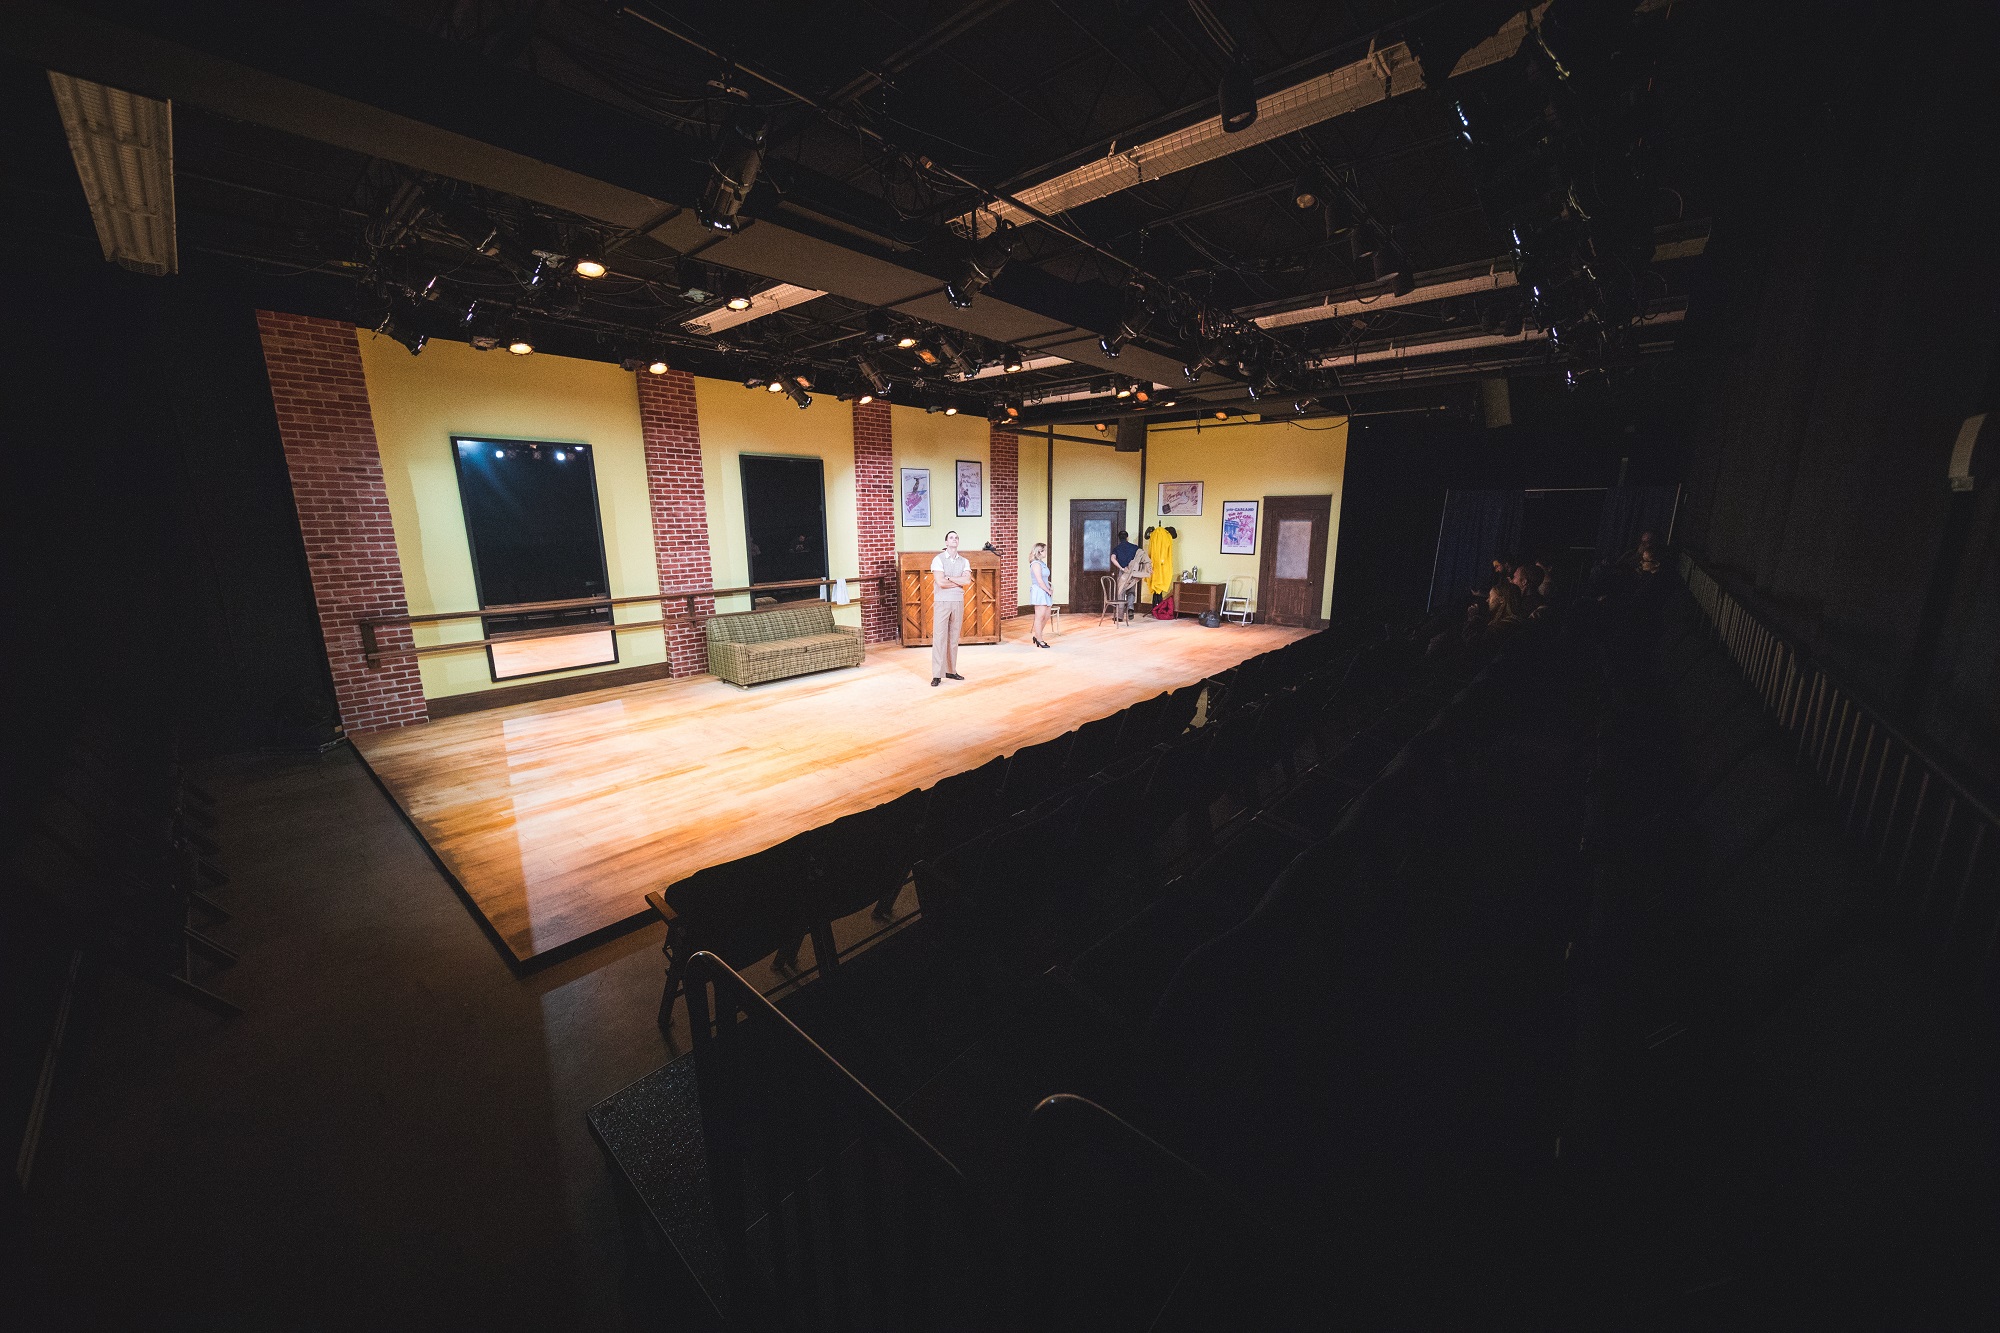 The Black Box Theatre during a show